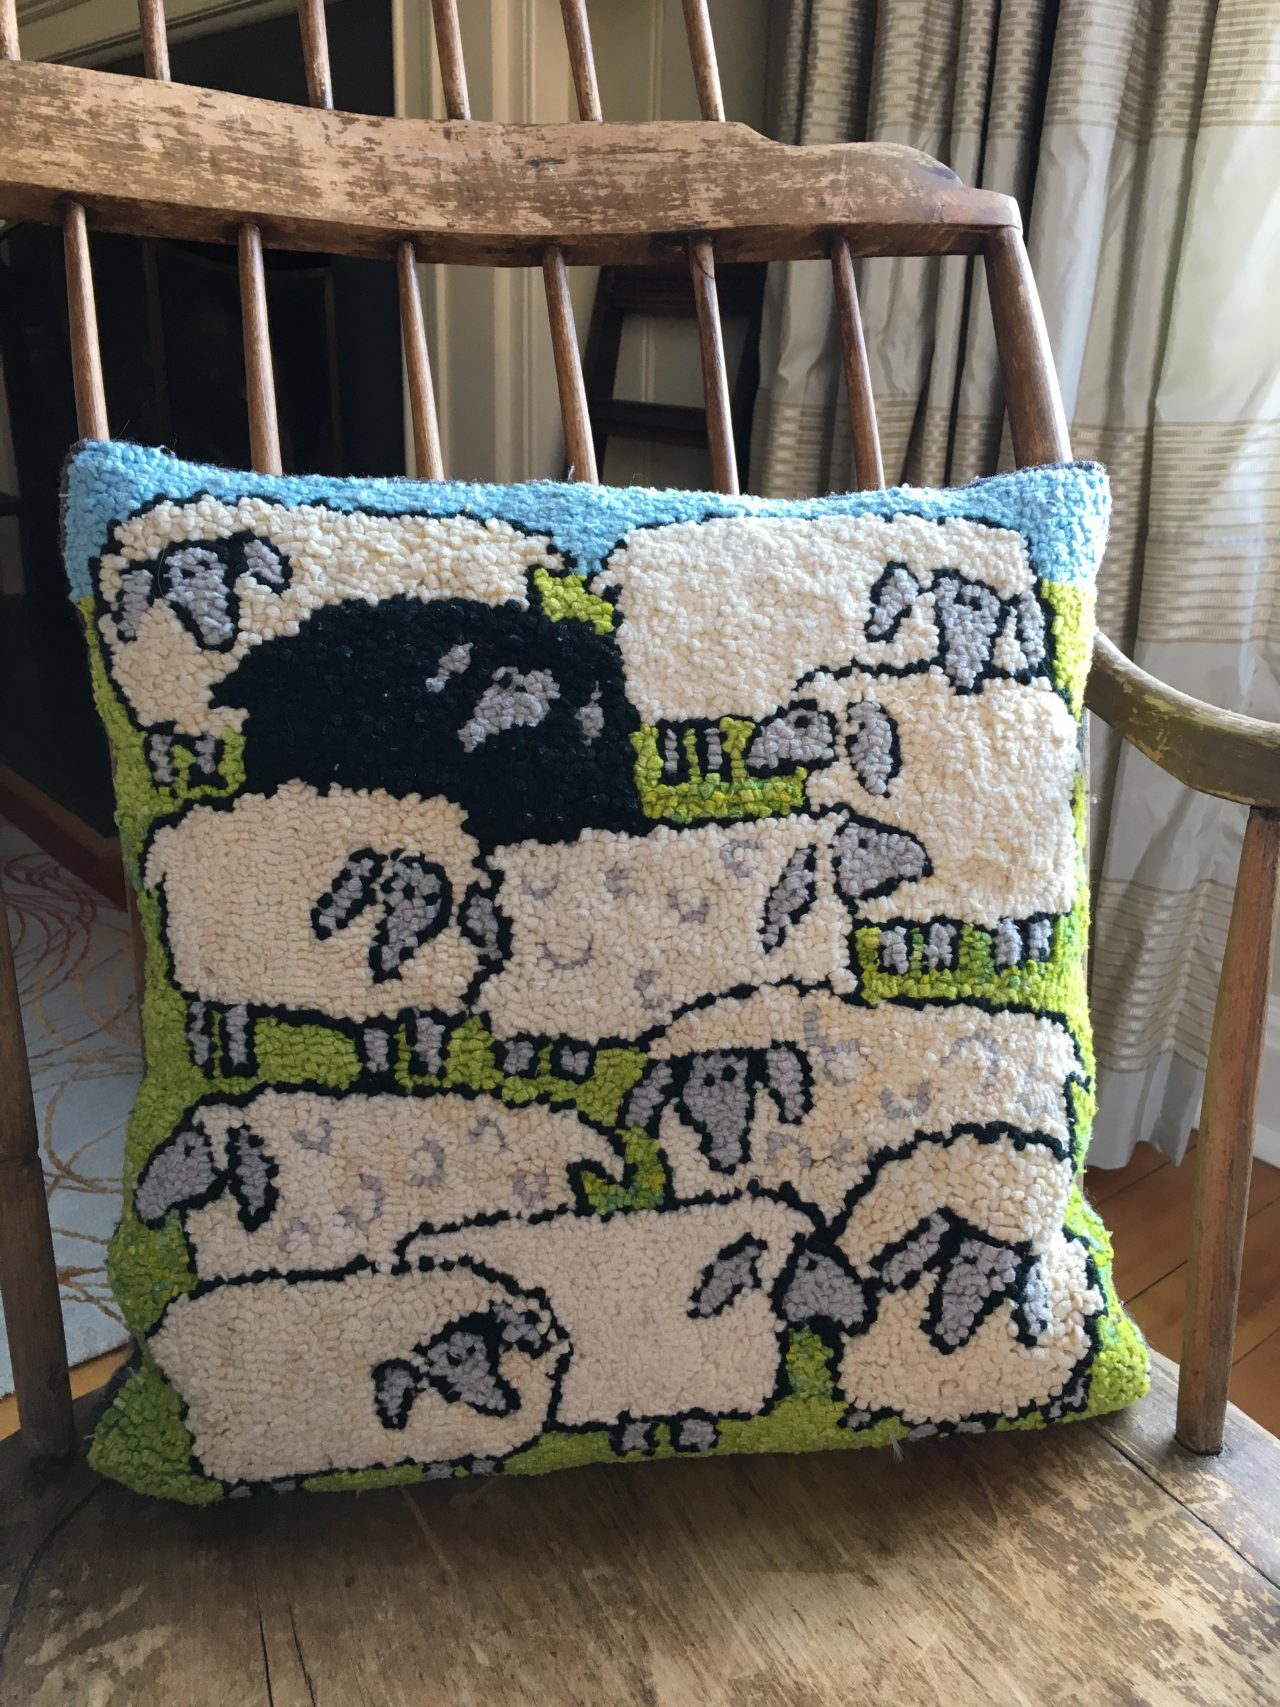 A hooked cushion with 10 white sheep and one black sheep on a wooden chair by Yvonne Iten-Scott.